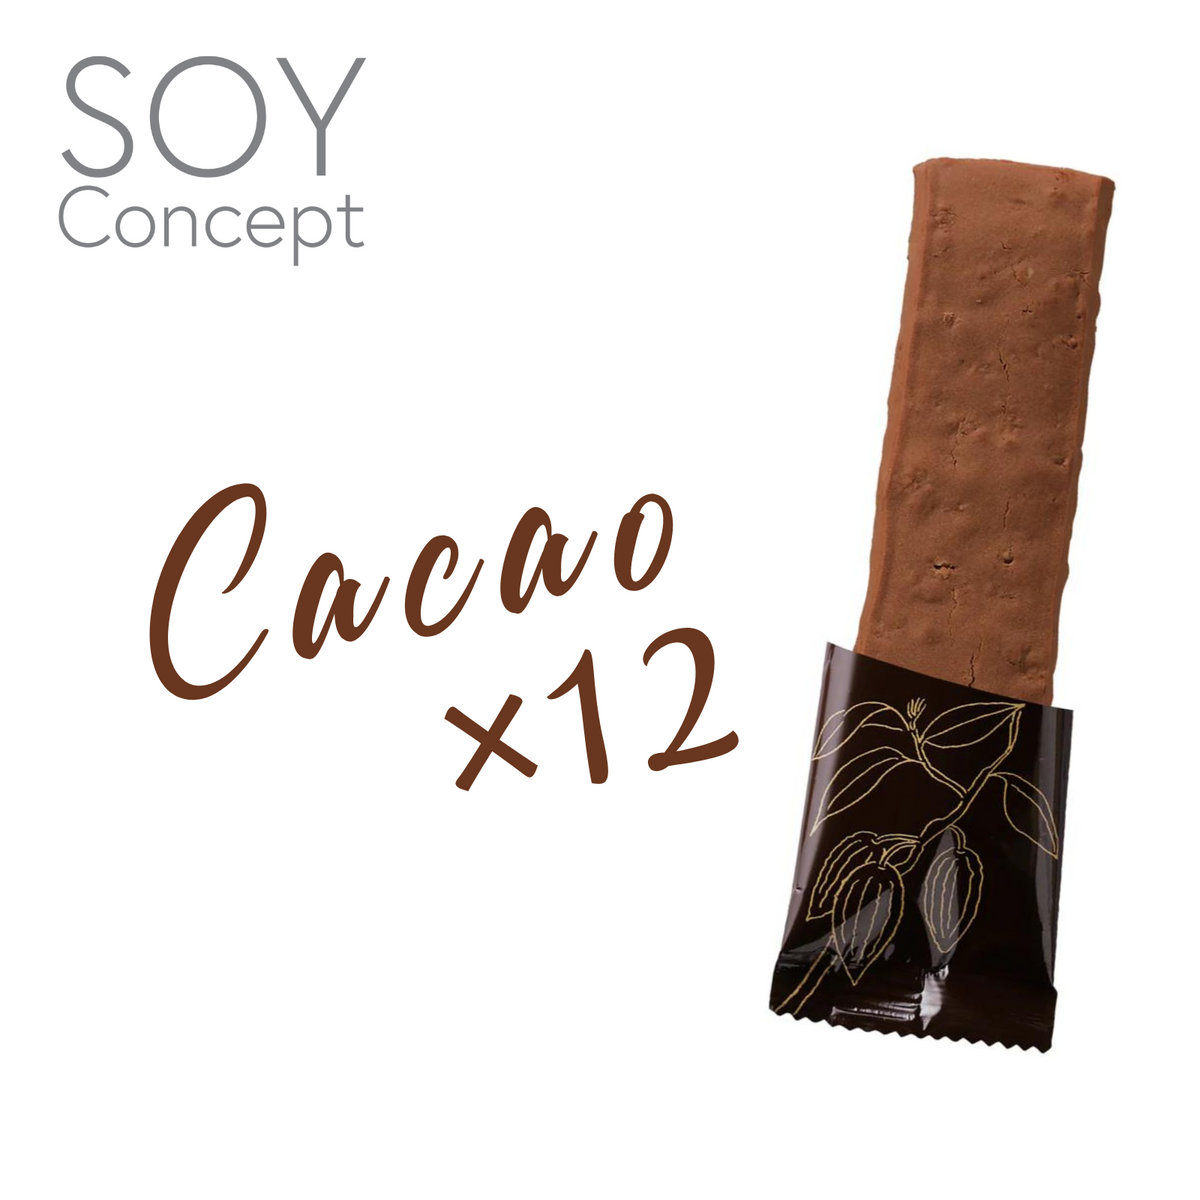 SOY Concept Cacao Cacao (12 bottles per box)